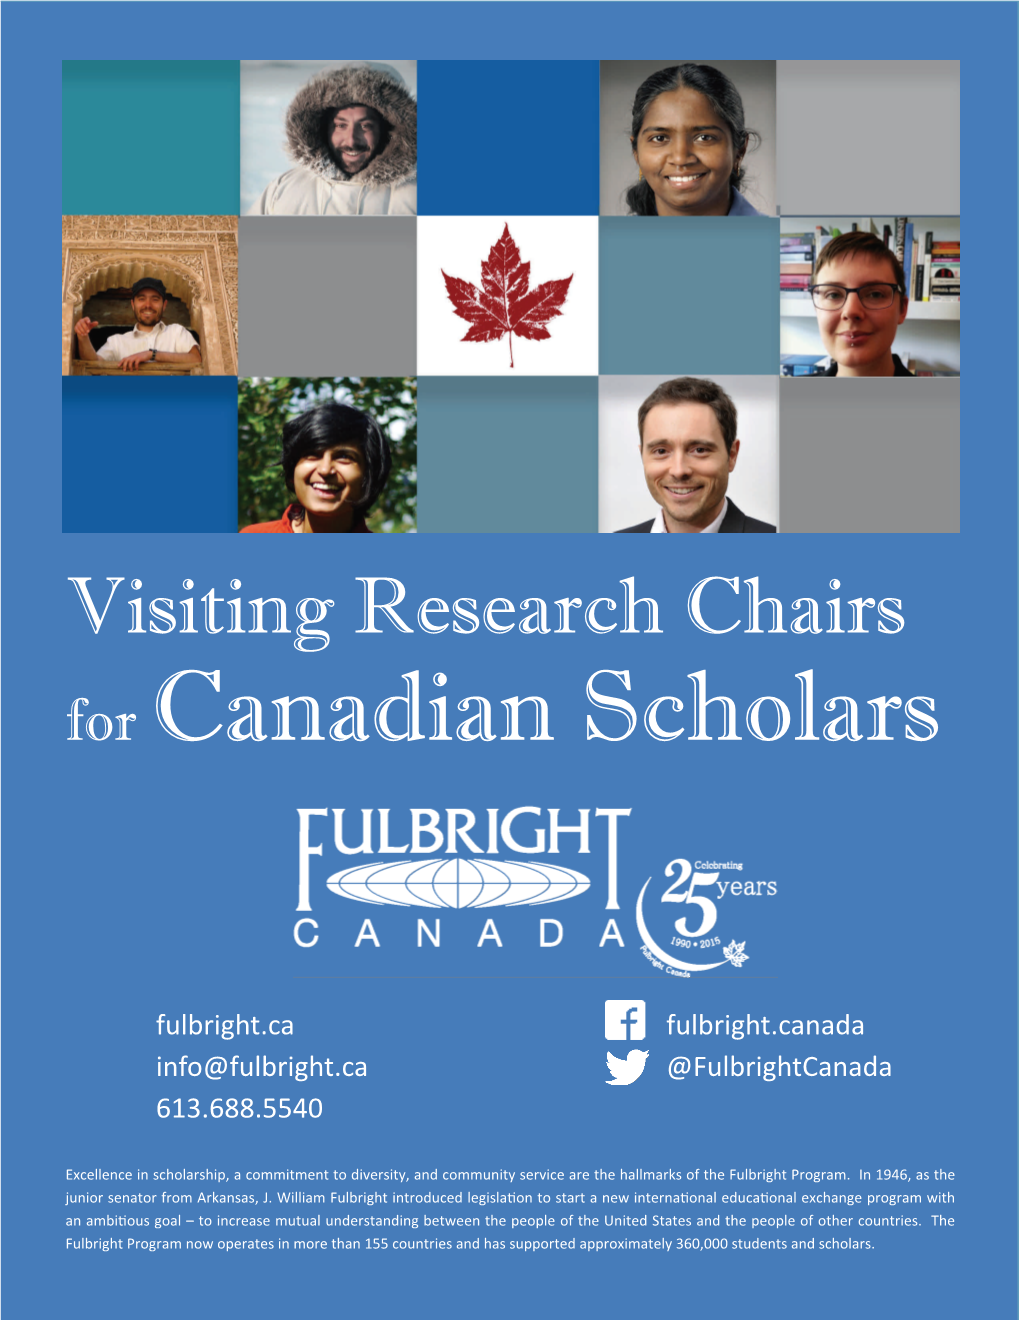 For Canadian Scholars